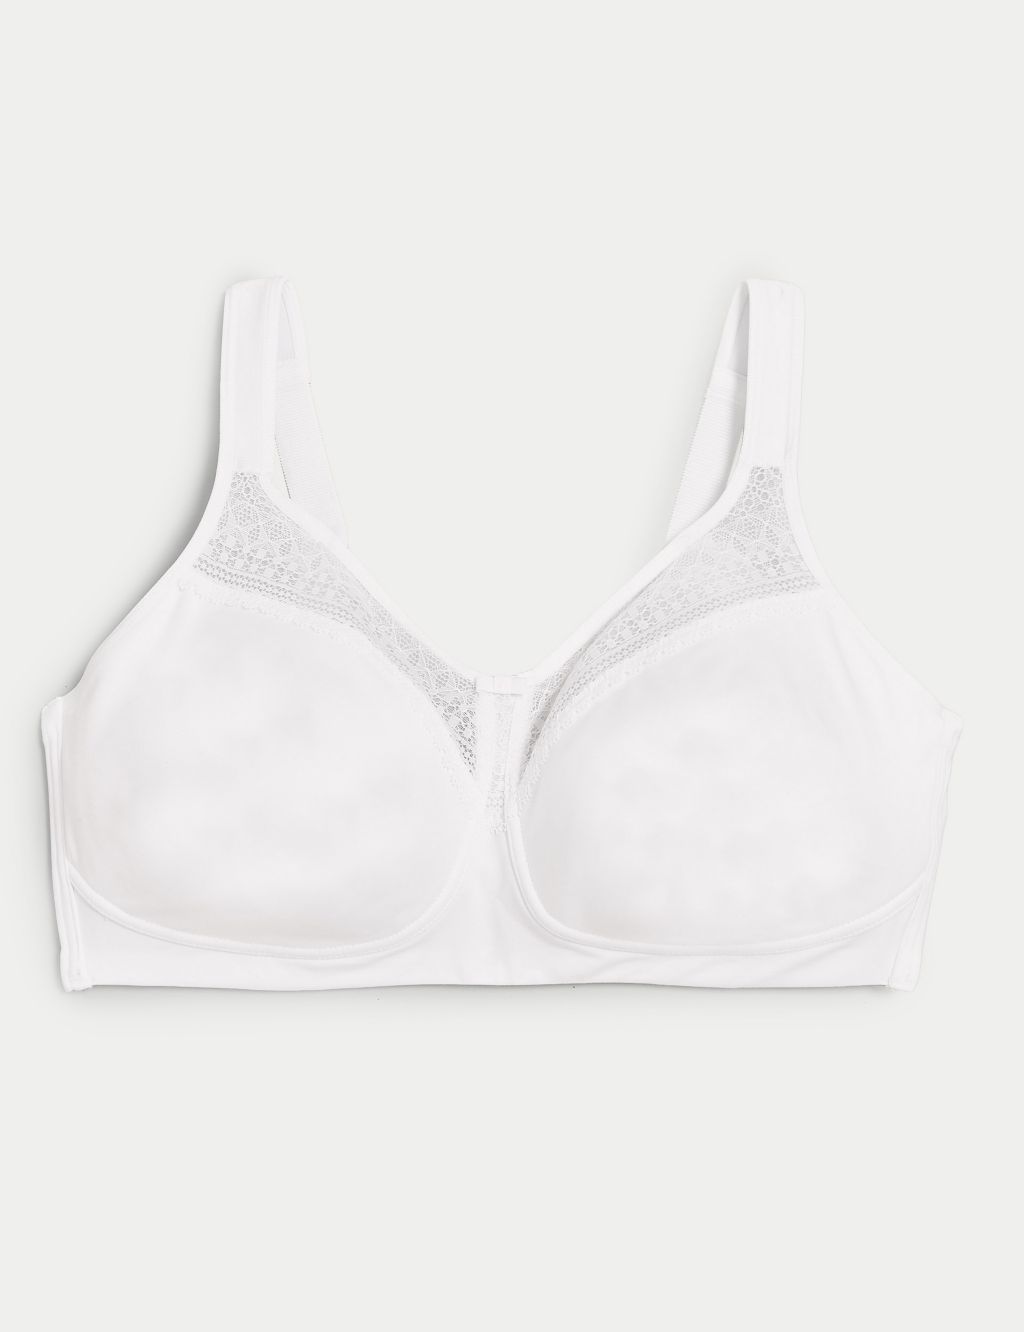 Cotton Blend & Lace Non Wired Total Support Bra B-H image 2